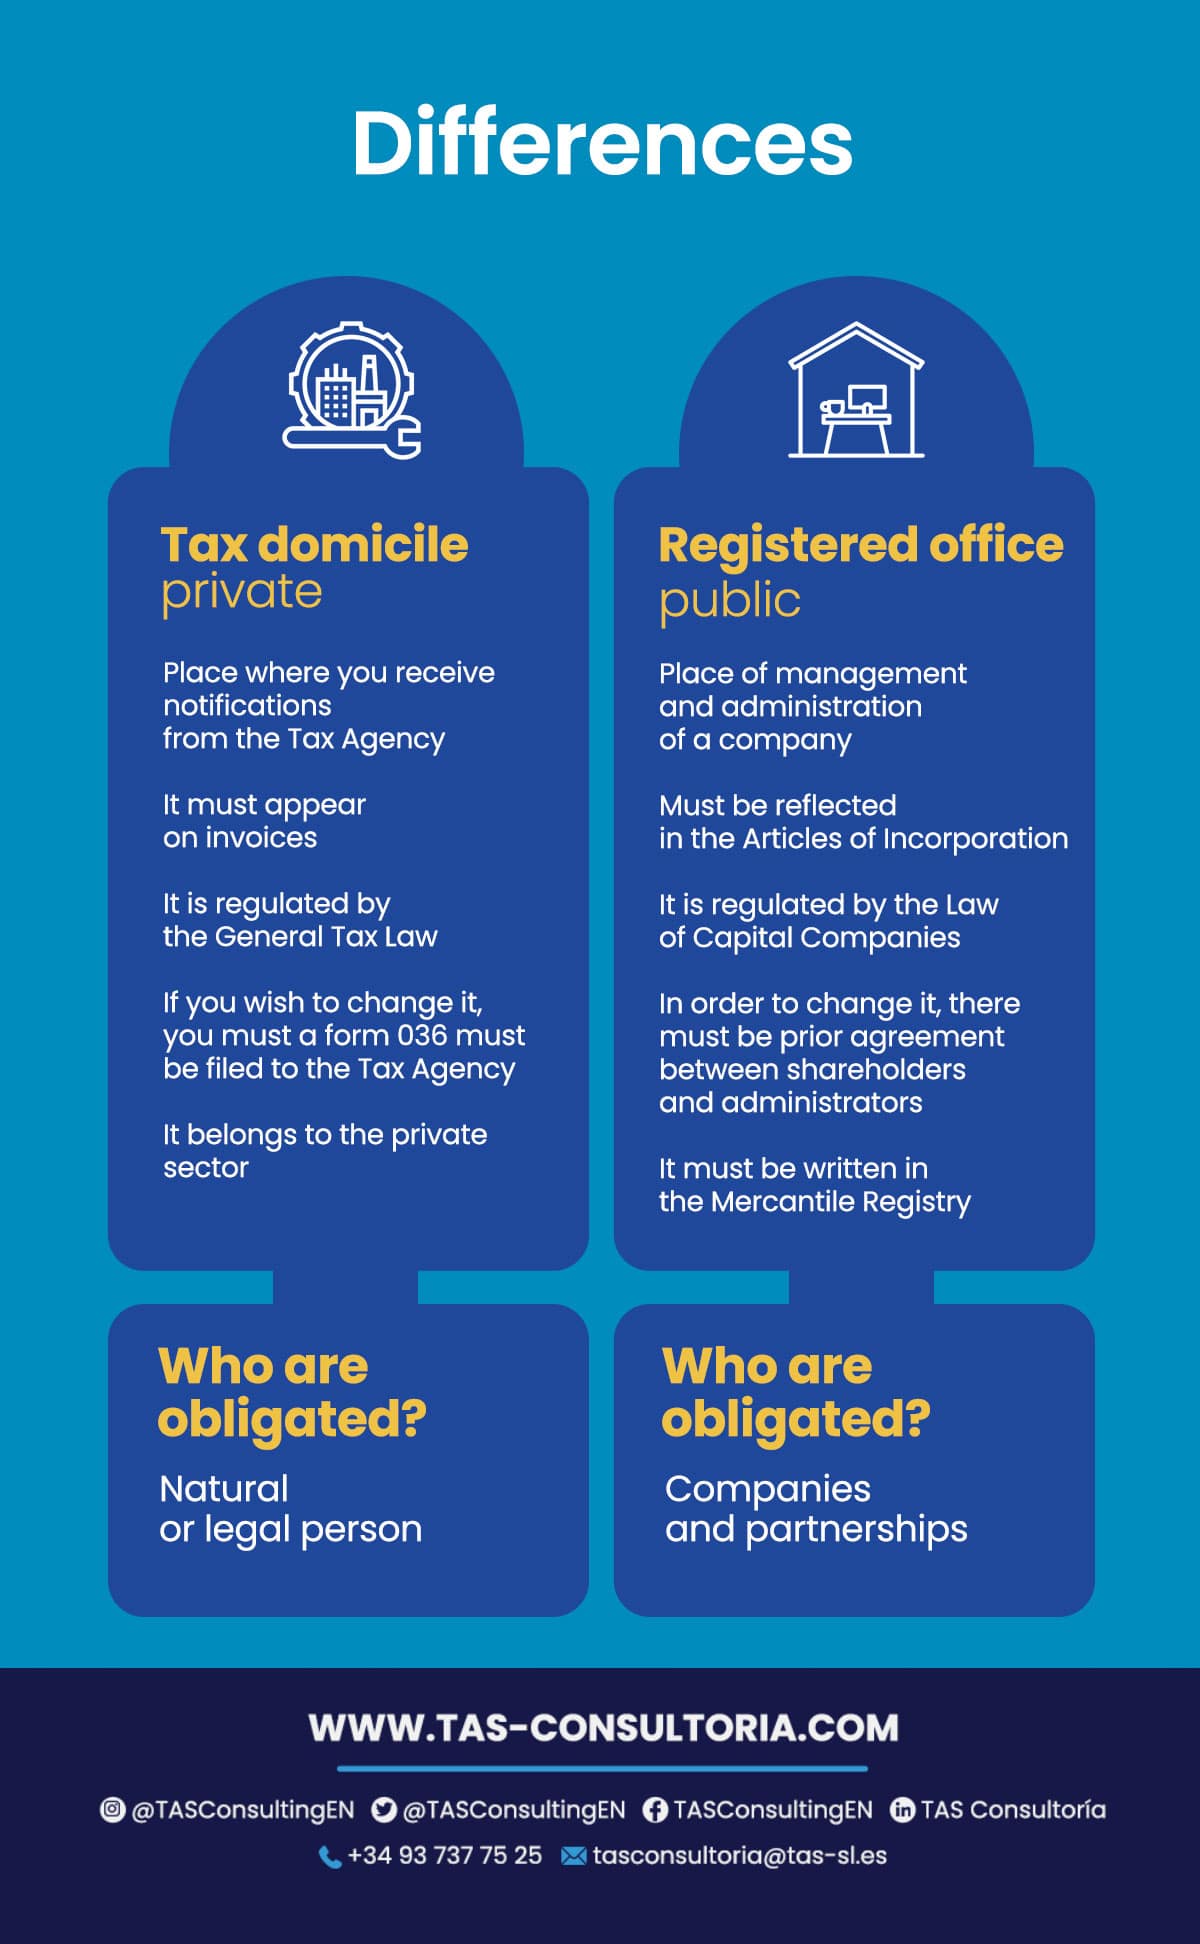 Difference between registered office and tax domicile